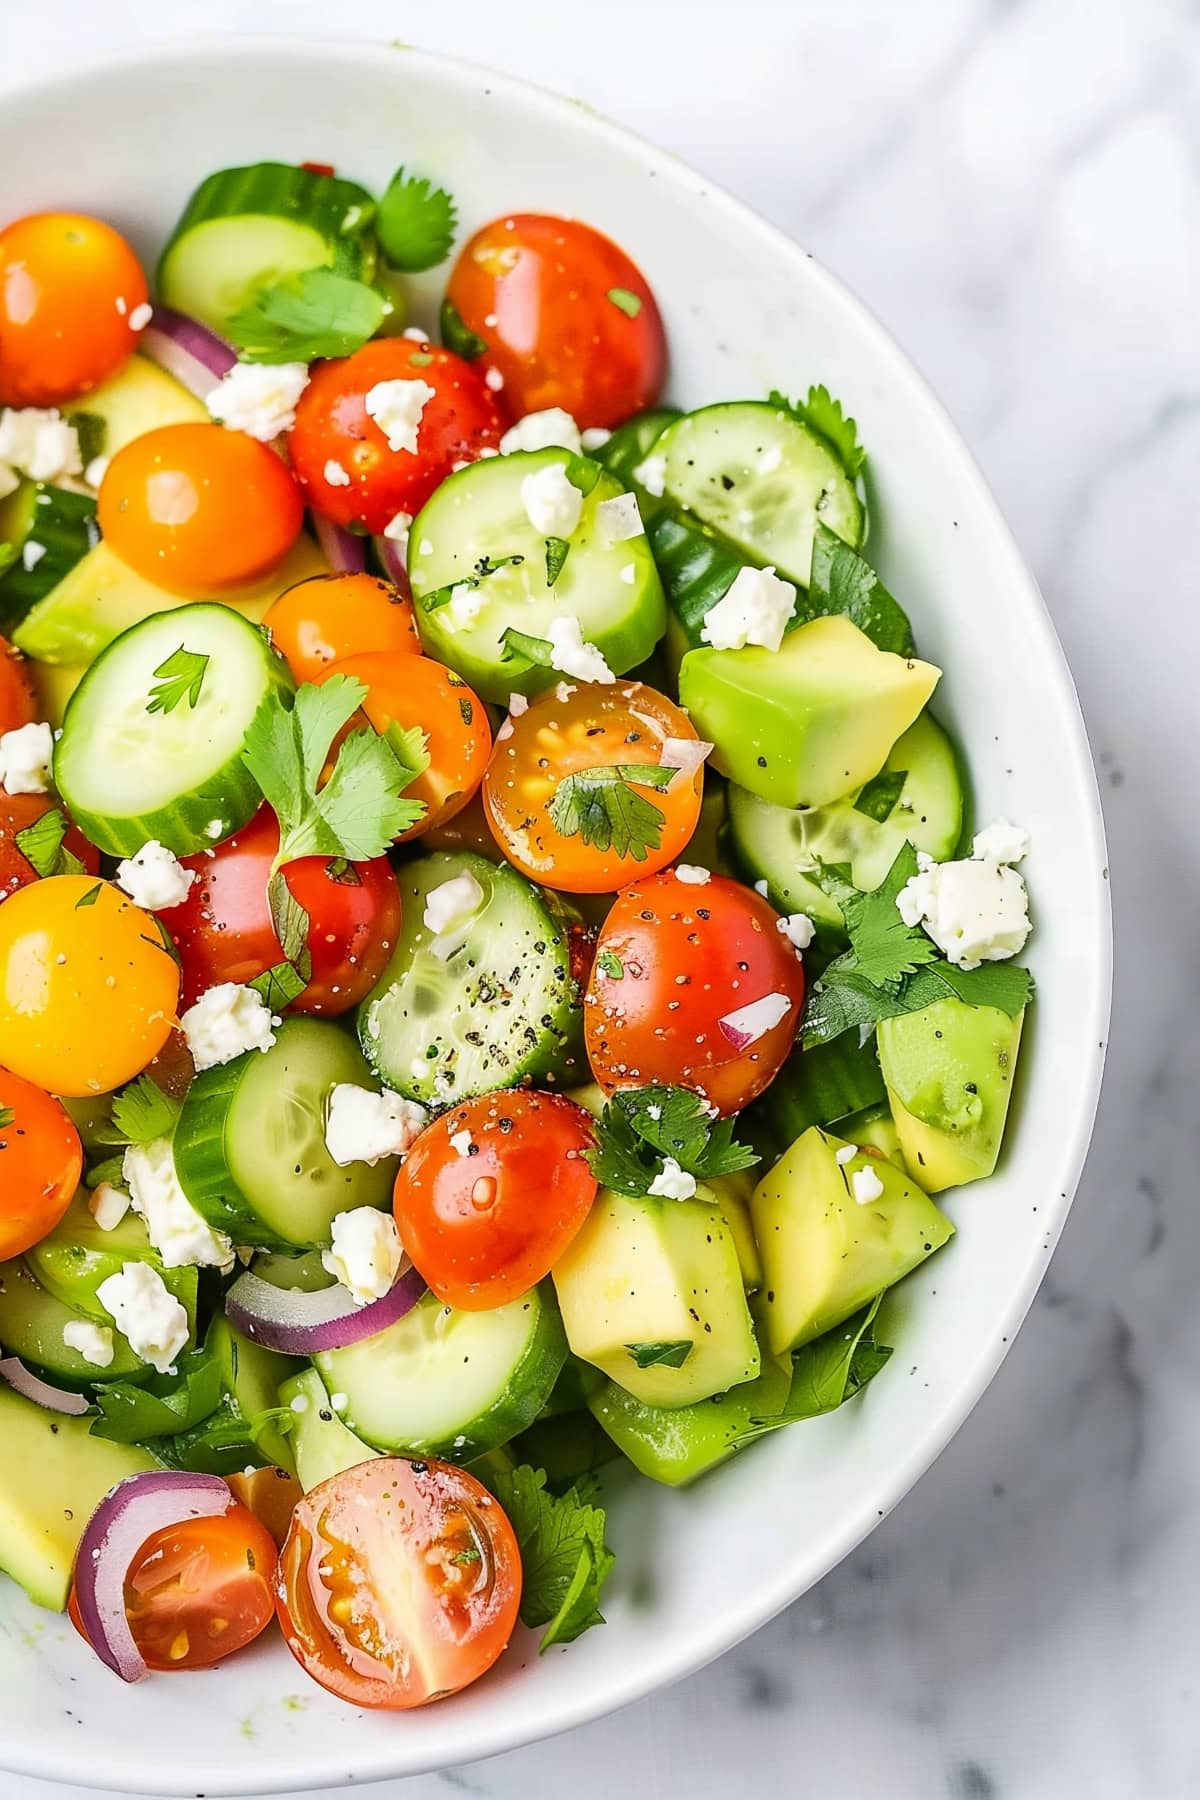 Homemade avocado salad with cucumber, cherry tomatoes and crumbled feta cheese.